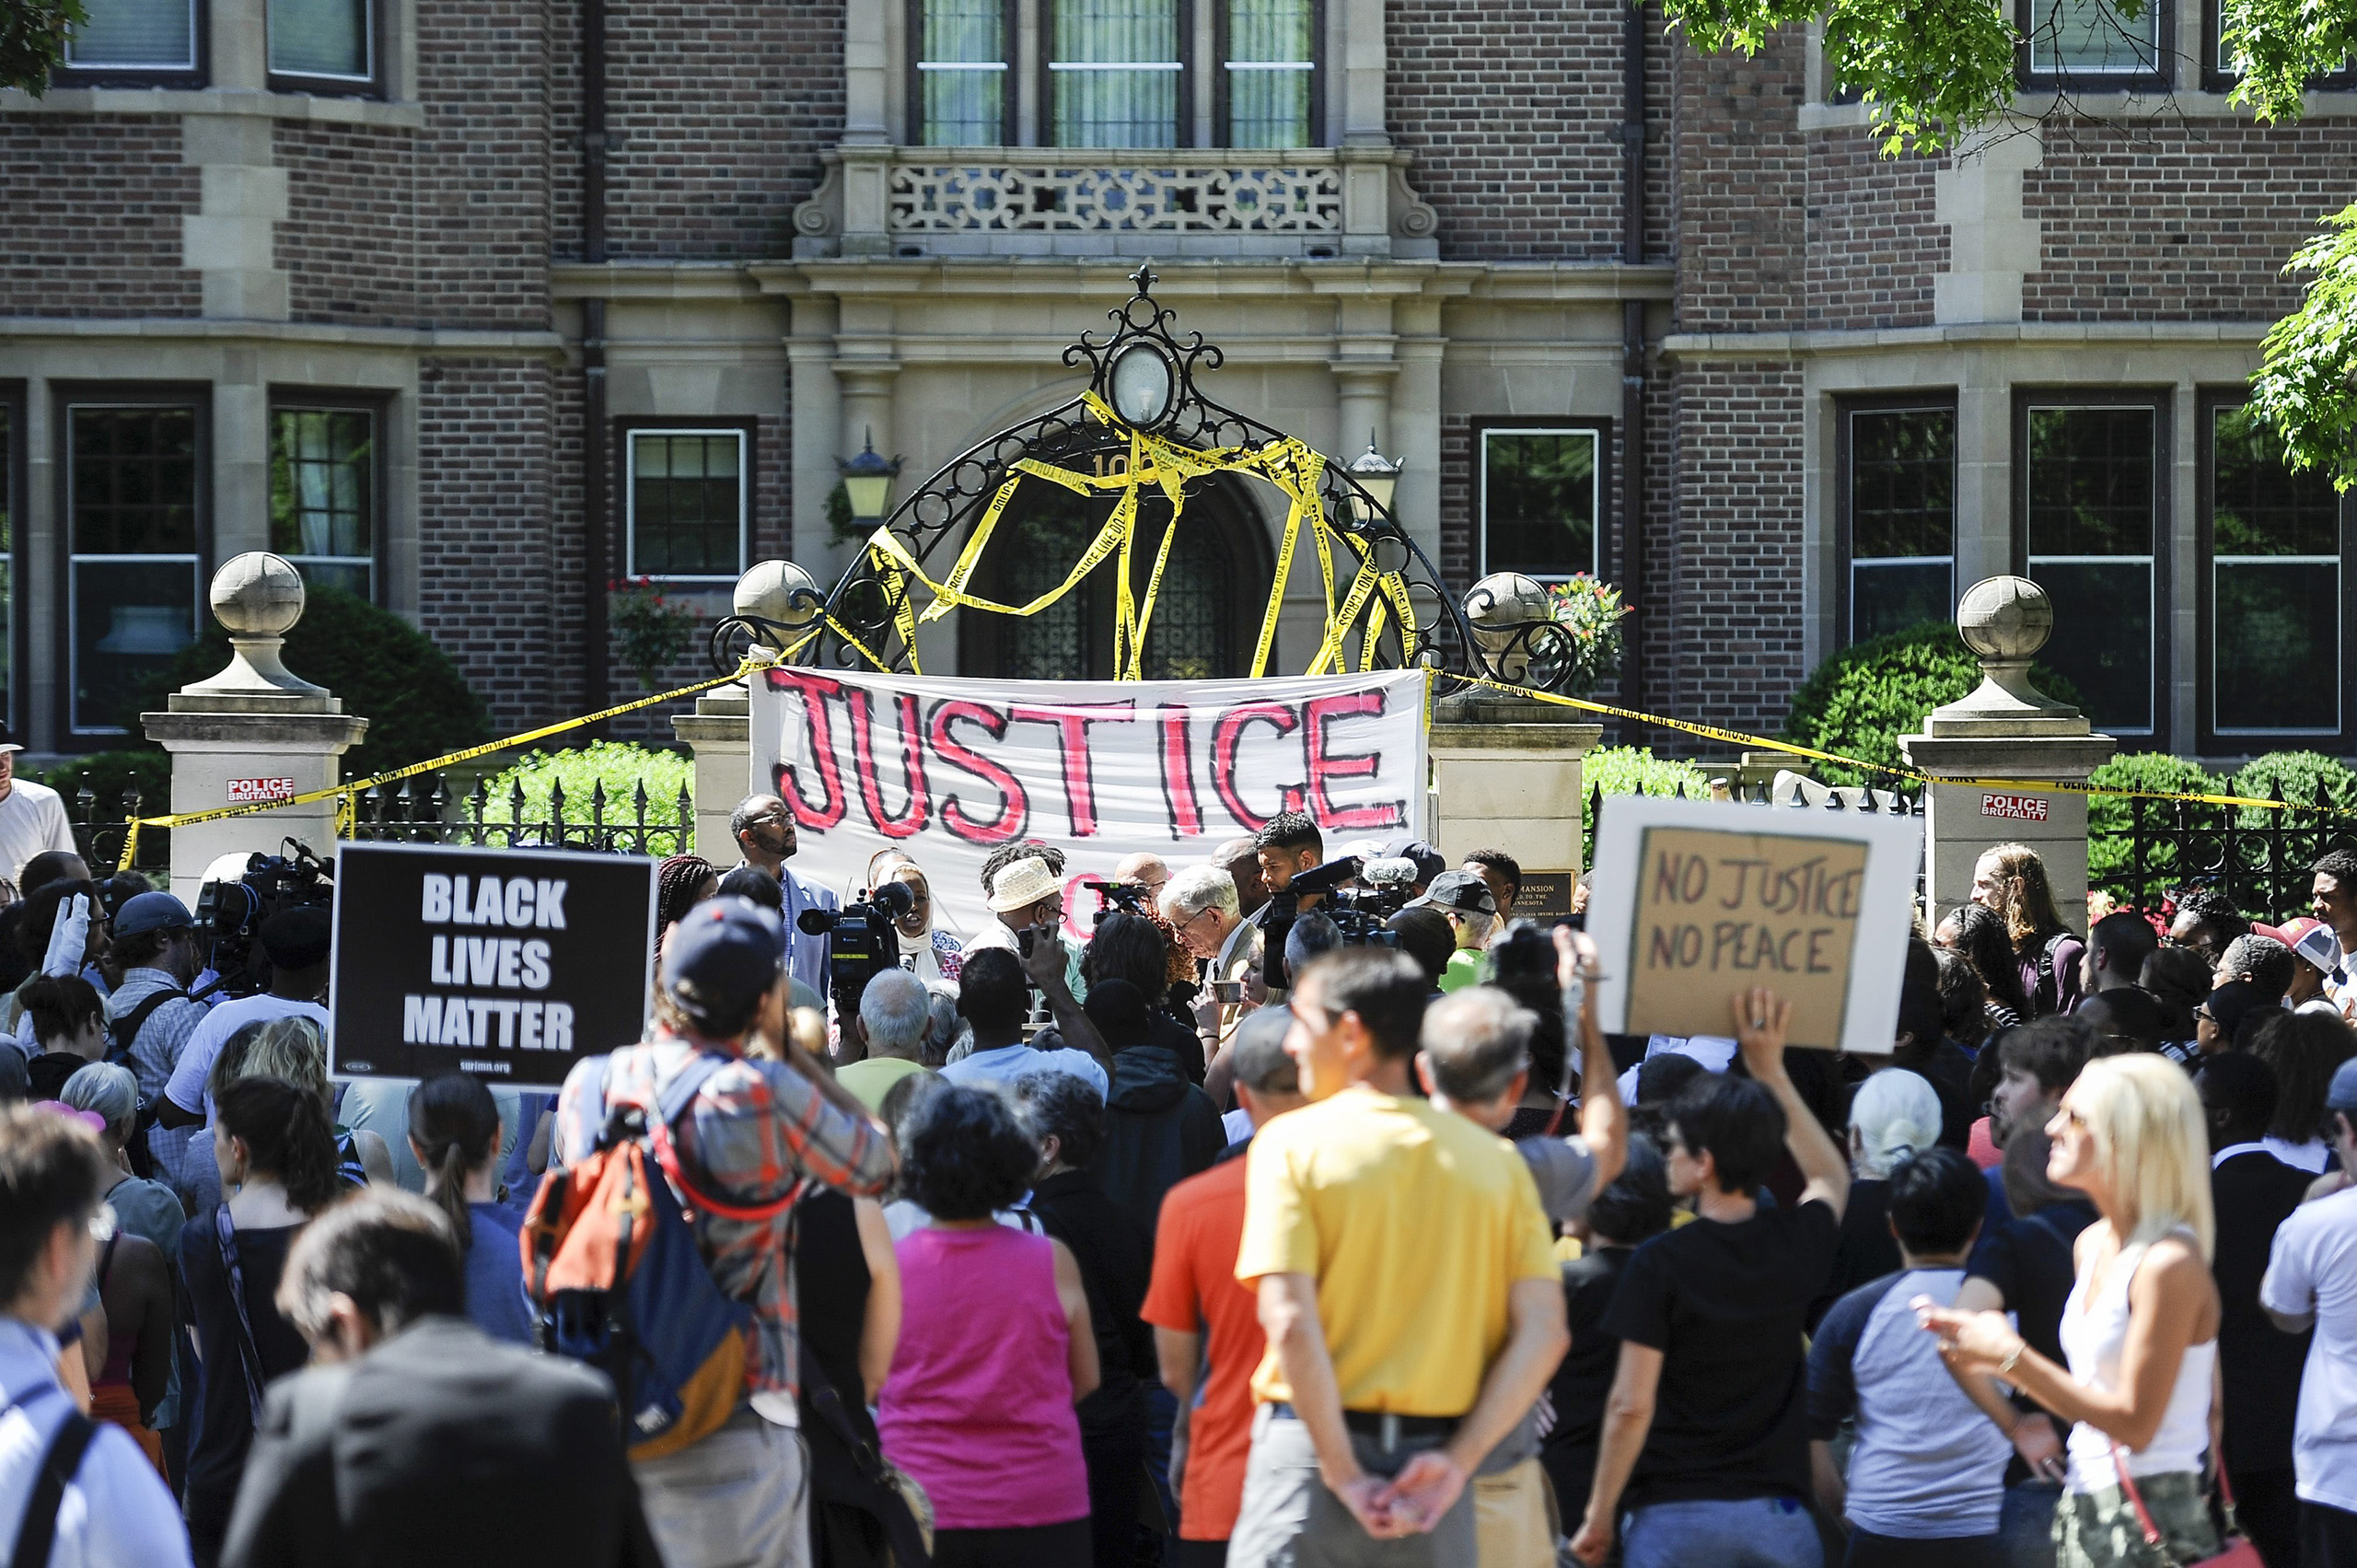 Protesters gather in front of the governor's residence in reaction to the the police shooting of Philando Castile in St. Paul, Minnesota, on July 7, 2016. (Craig Lassig—EPA)